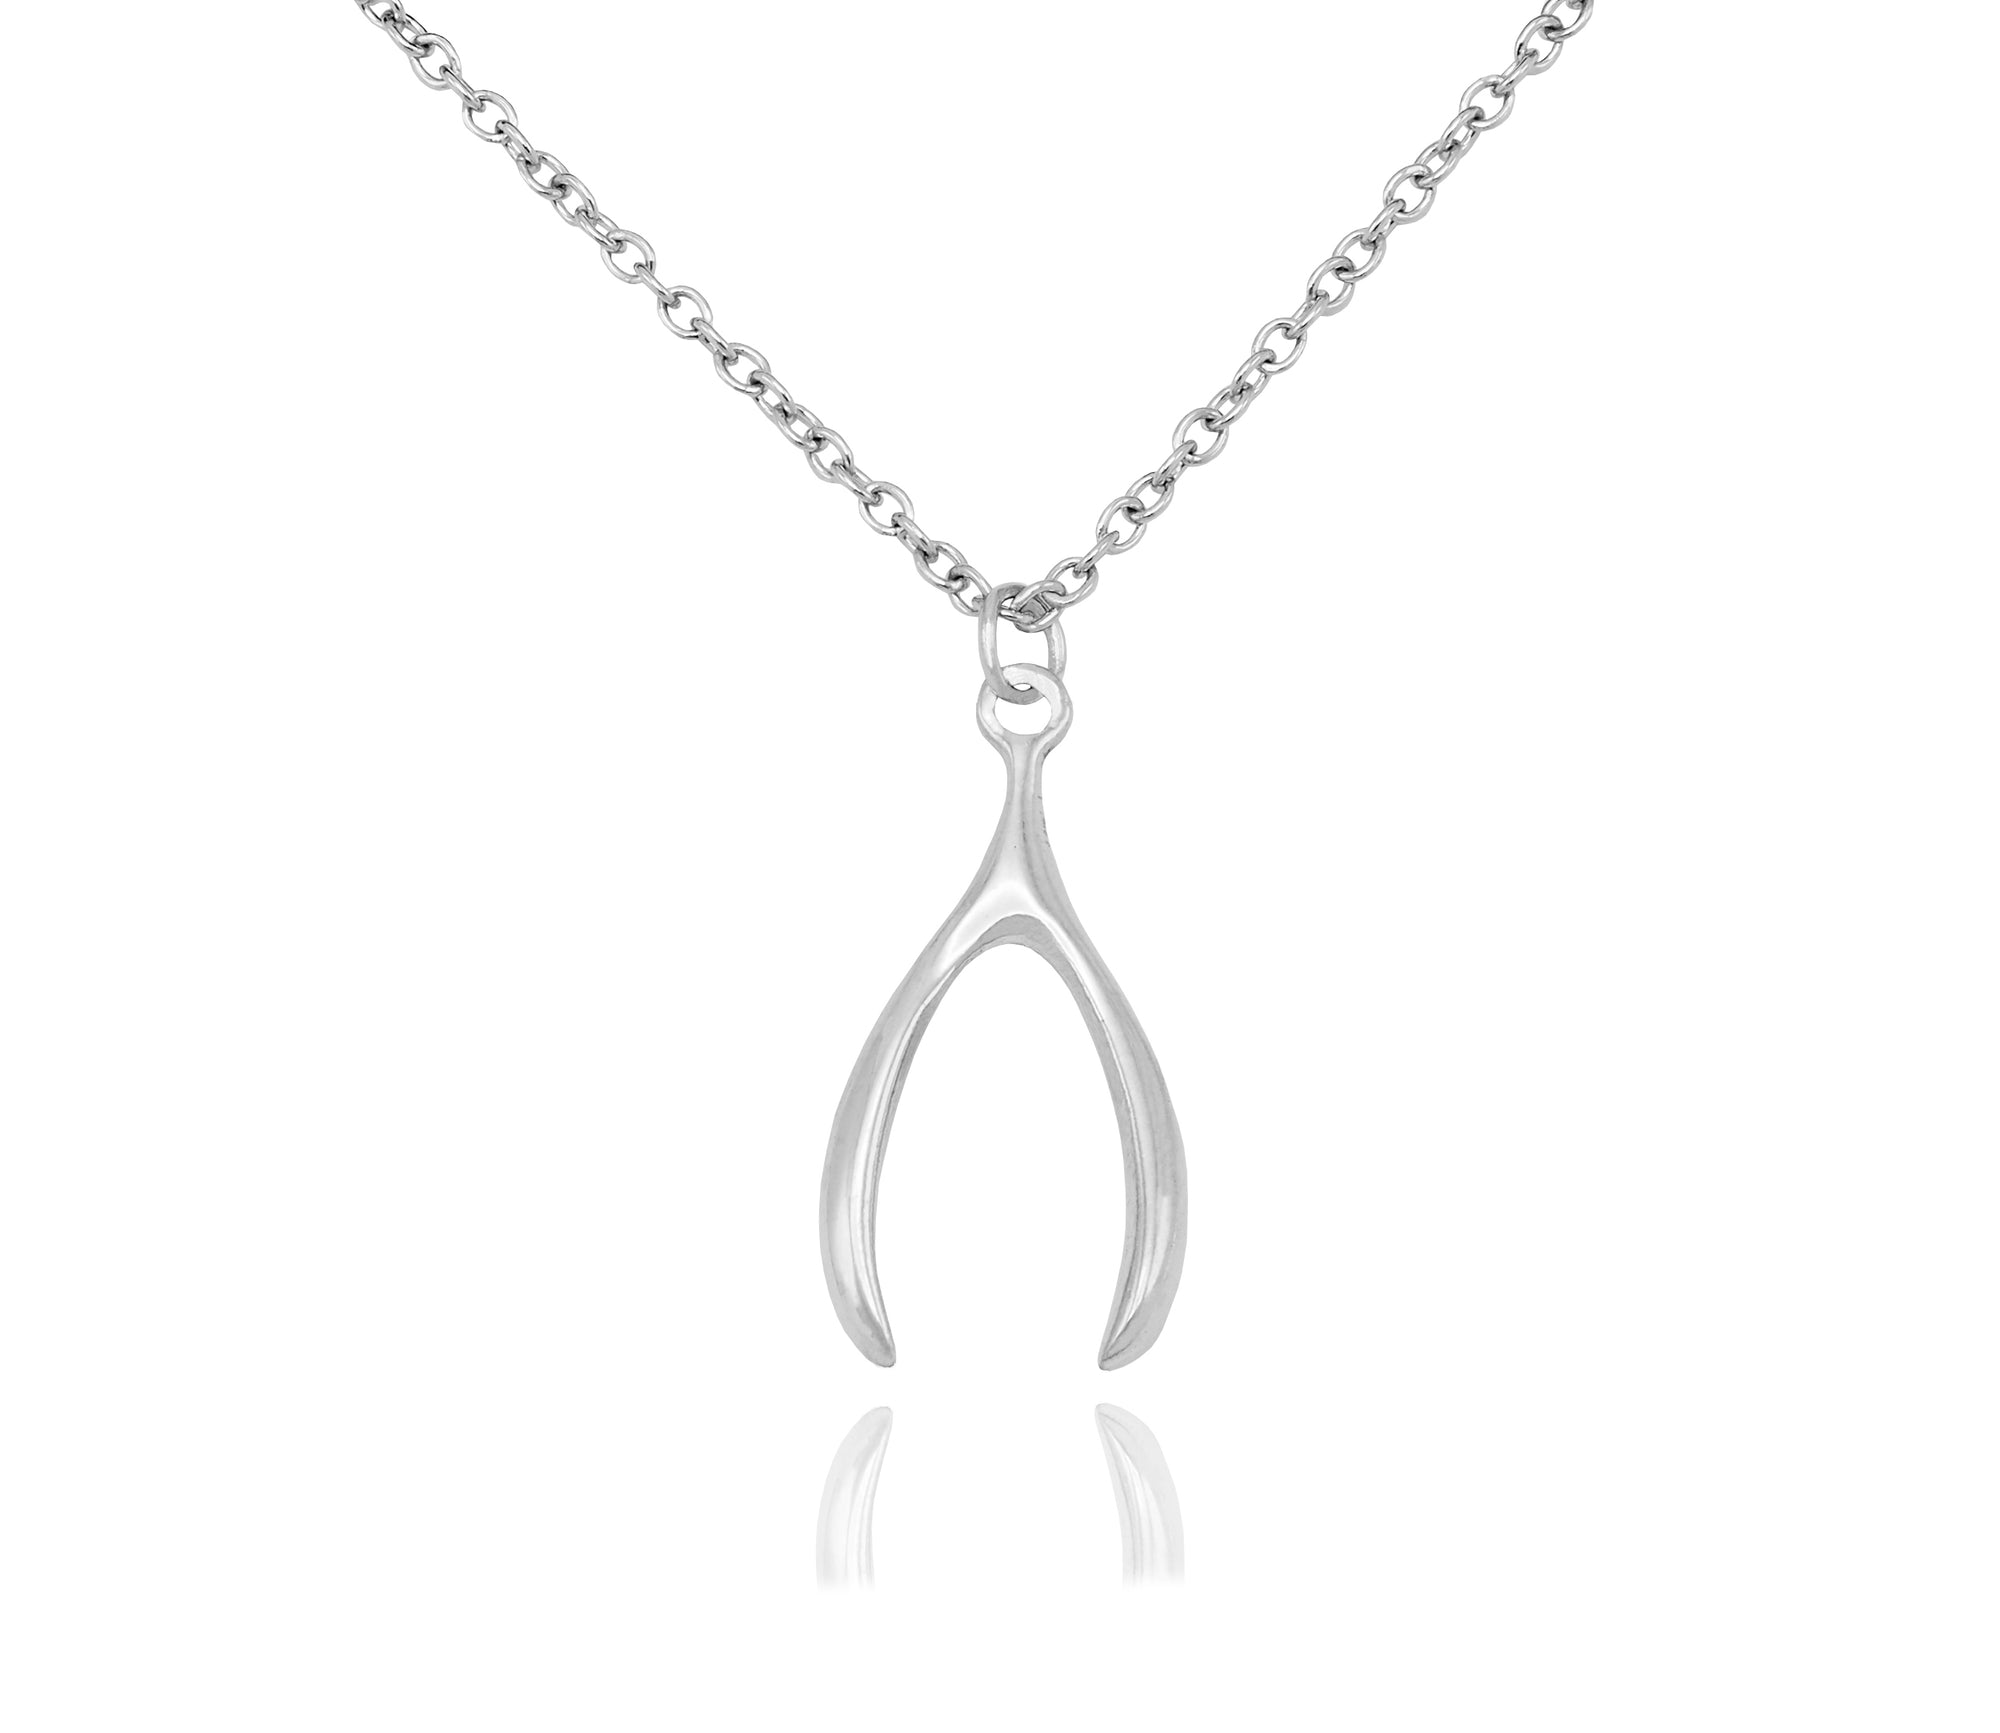 925 Sterling Silver Wishbone Charm Pendant Necklace (16-24 inch).